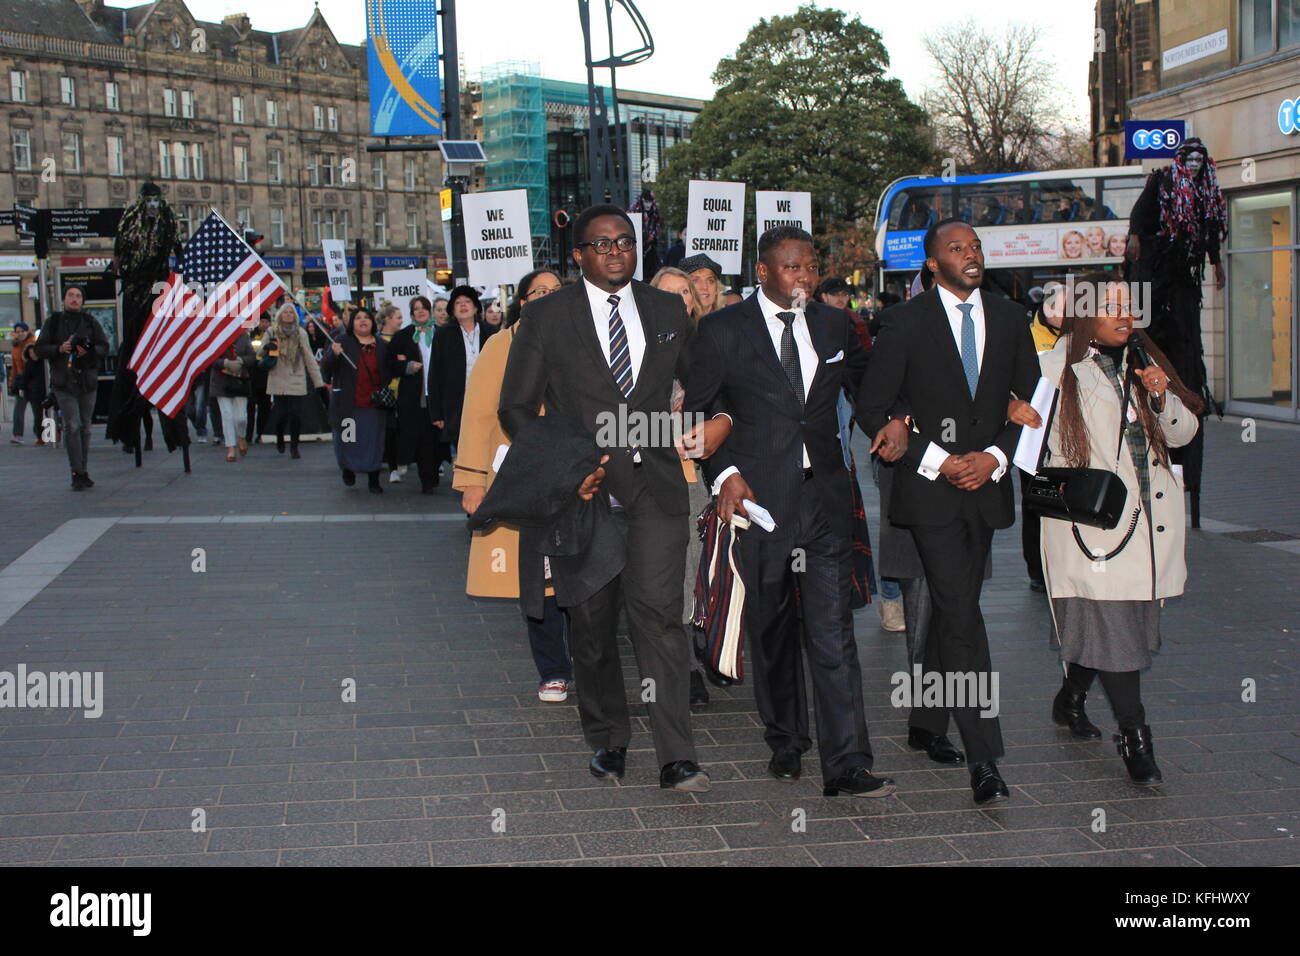 Newcastle upon tyne, UK. 29th Oct, 2017. Freedom on the Tyne Parade celebrate the inspiring visit of Dr Martin Luther King Jr receiving his honorary degree 50 years ago. Newcastle upon Tyne, UK, October 29th. Credit: David Whinham/Alamy Live News Stock Photo